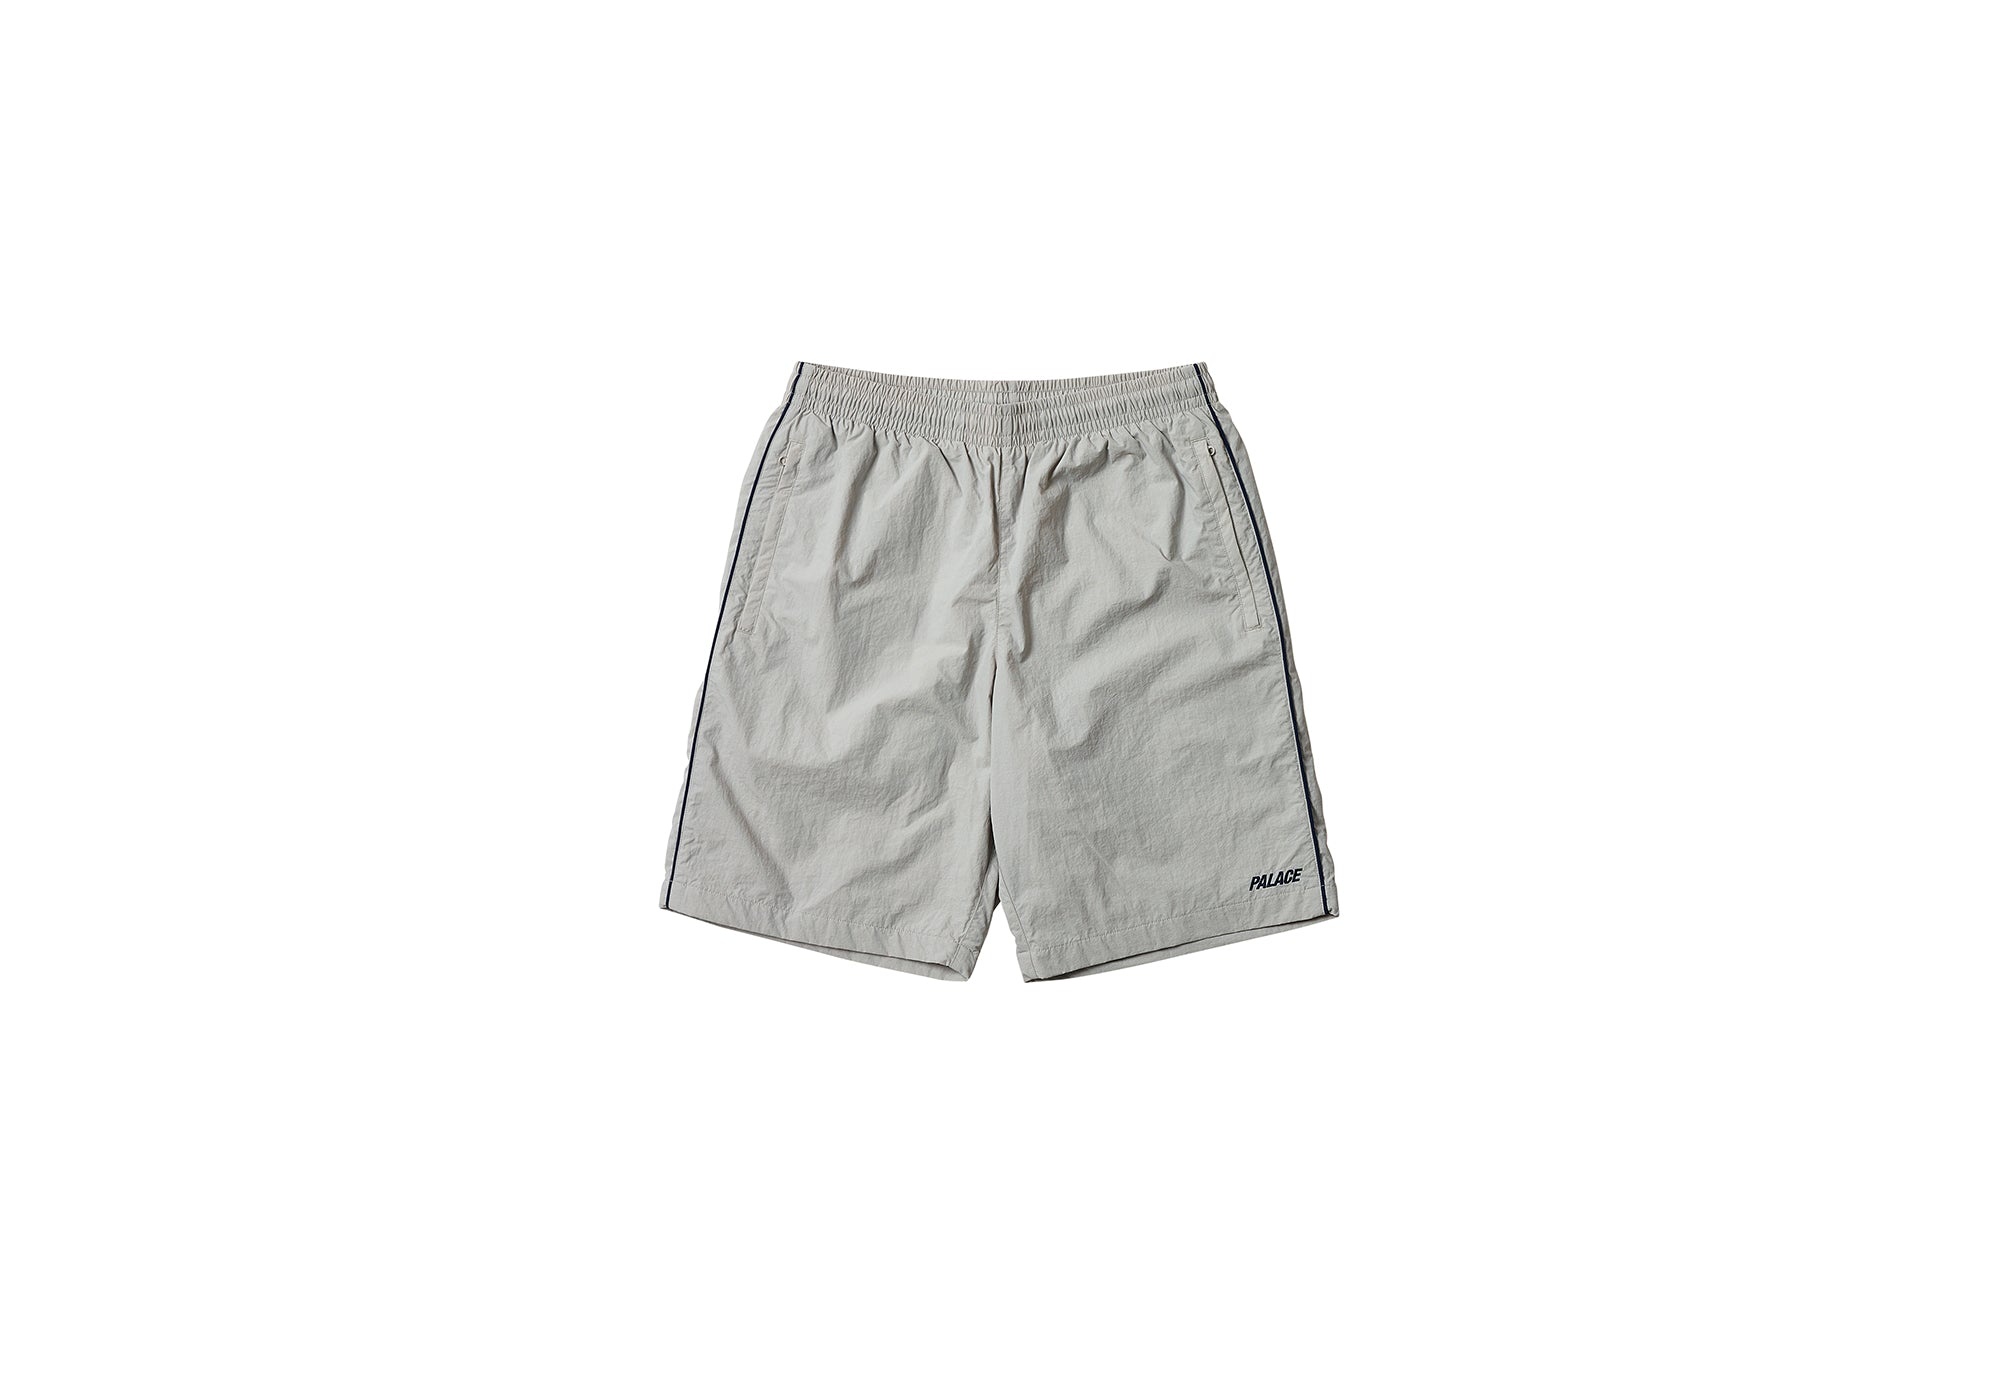 PIPED SHELL SHORT GREY - 1